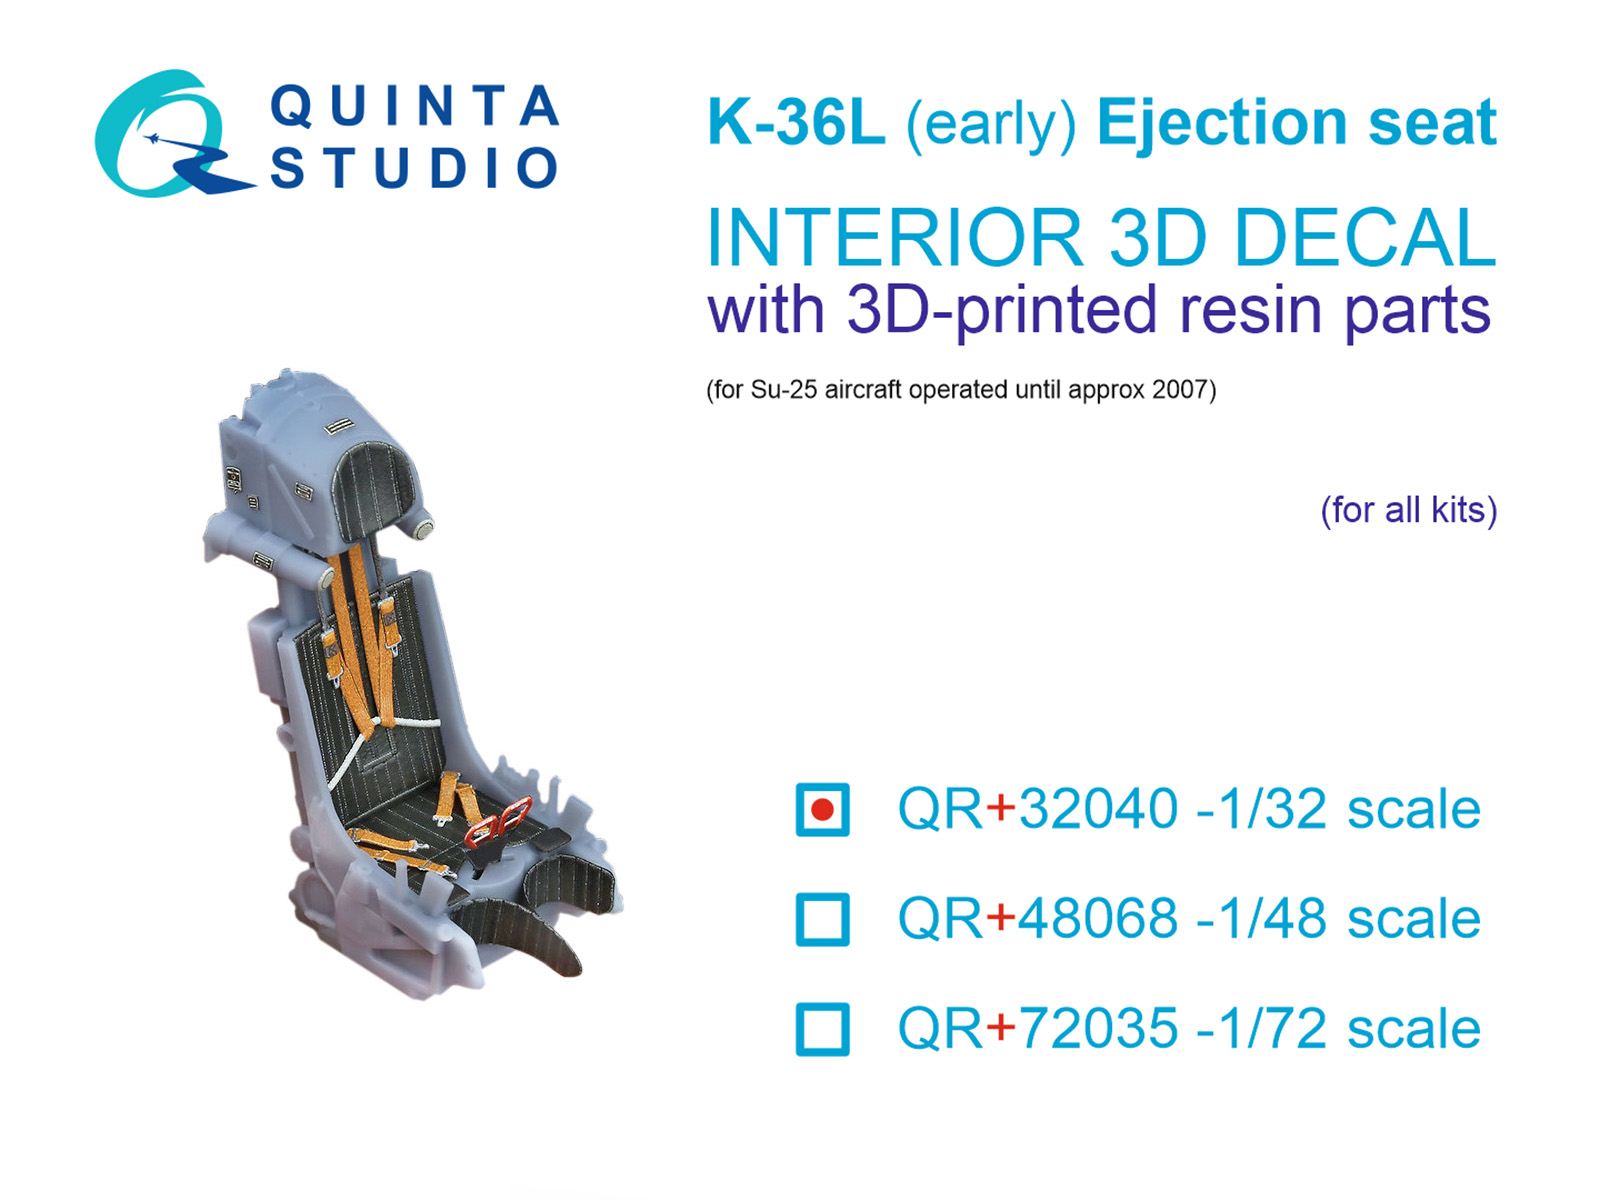 K-36L (early) ejection seat (for Su-25 aircraft until 2007) (All kits)